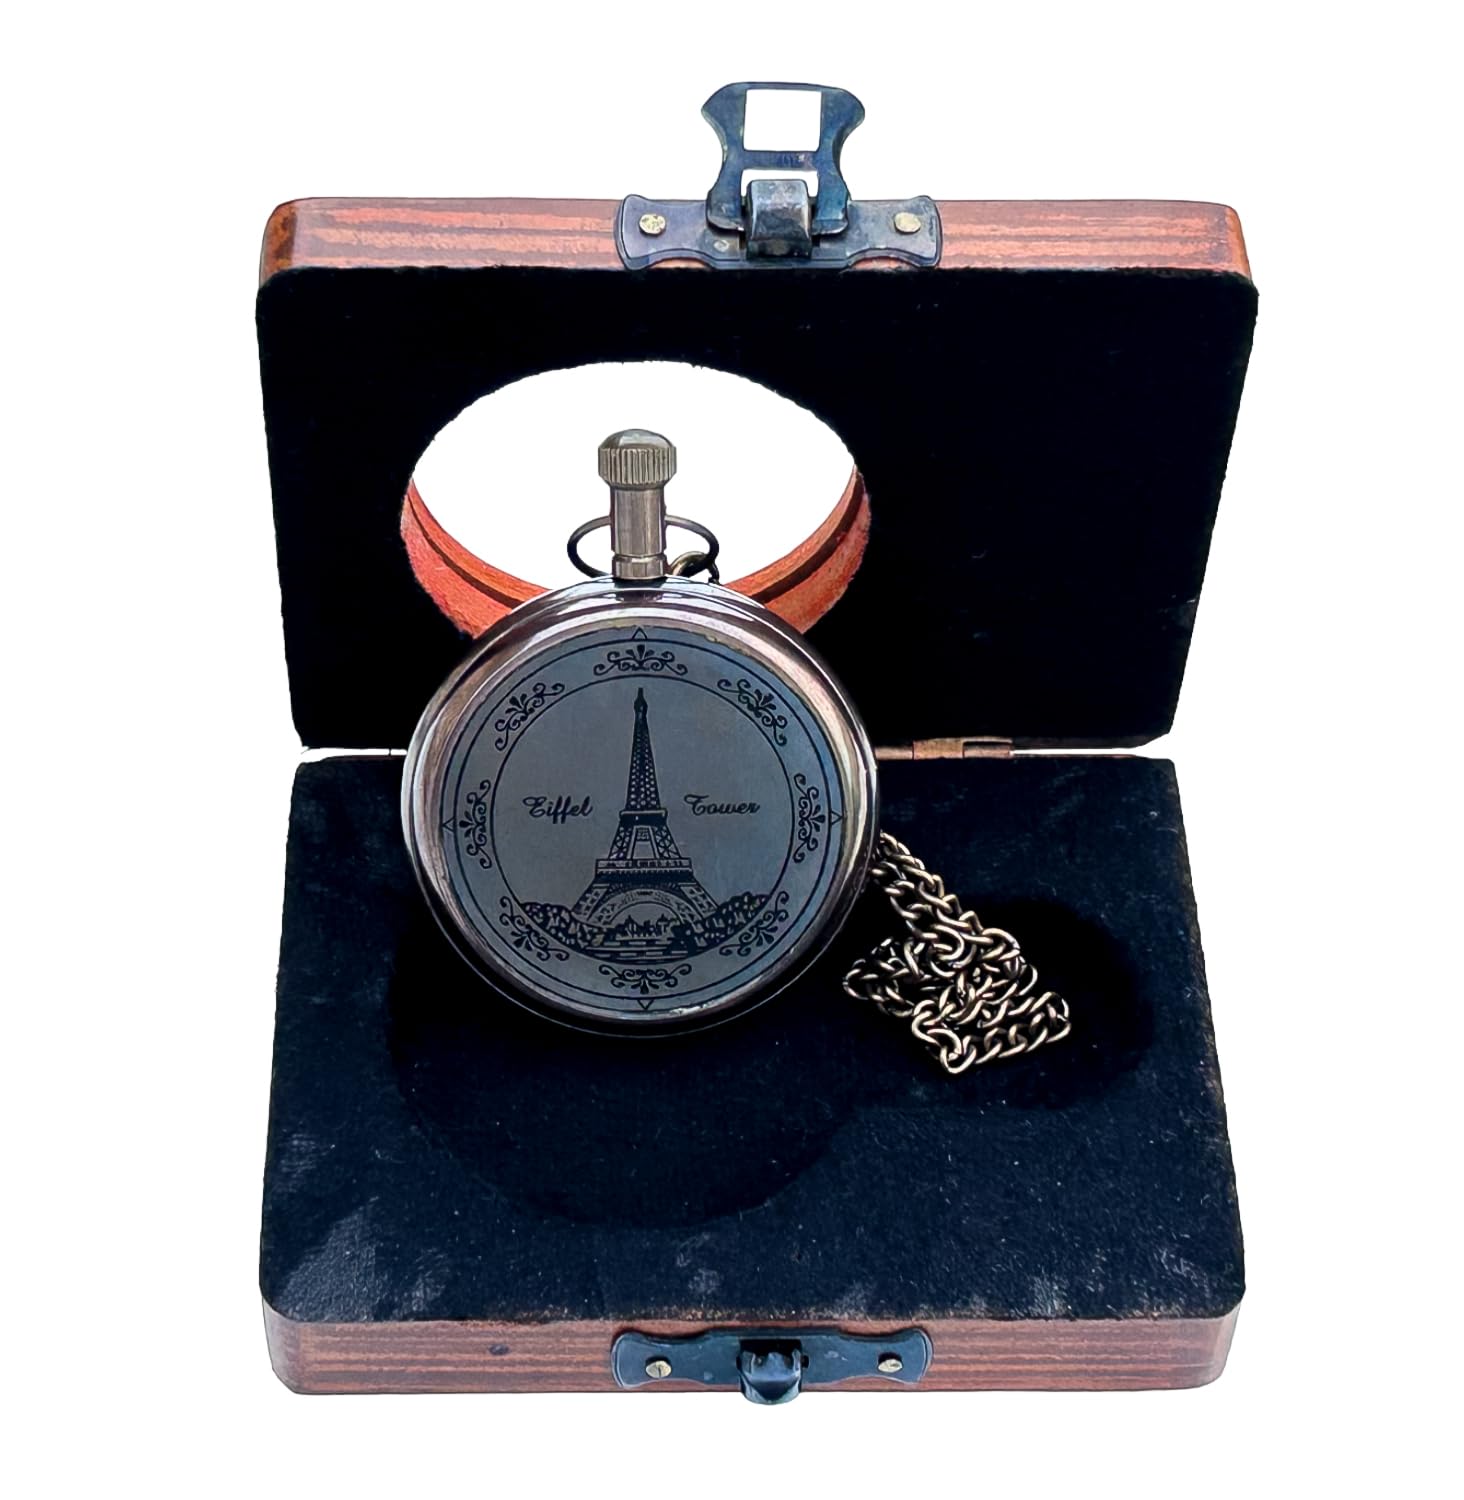 Generic Hassanhandicrafts Vintage Antique Maritime Brass Pocket Watch Titanic Ship Dial with Wooden Box